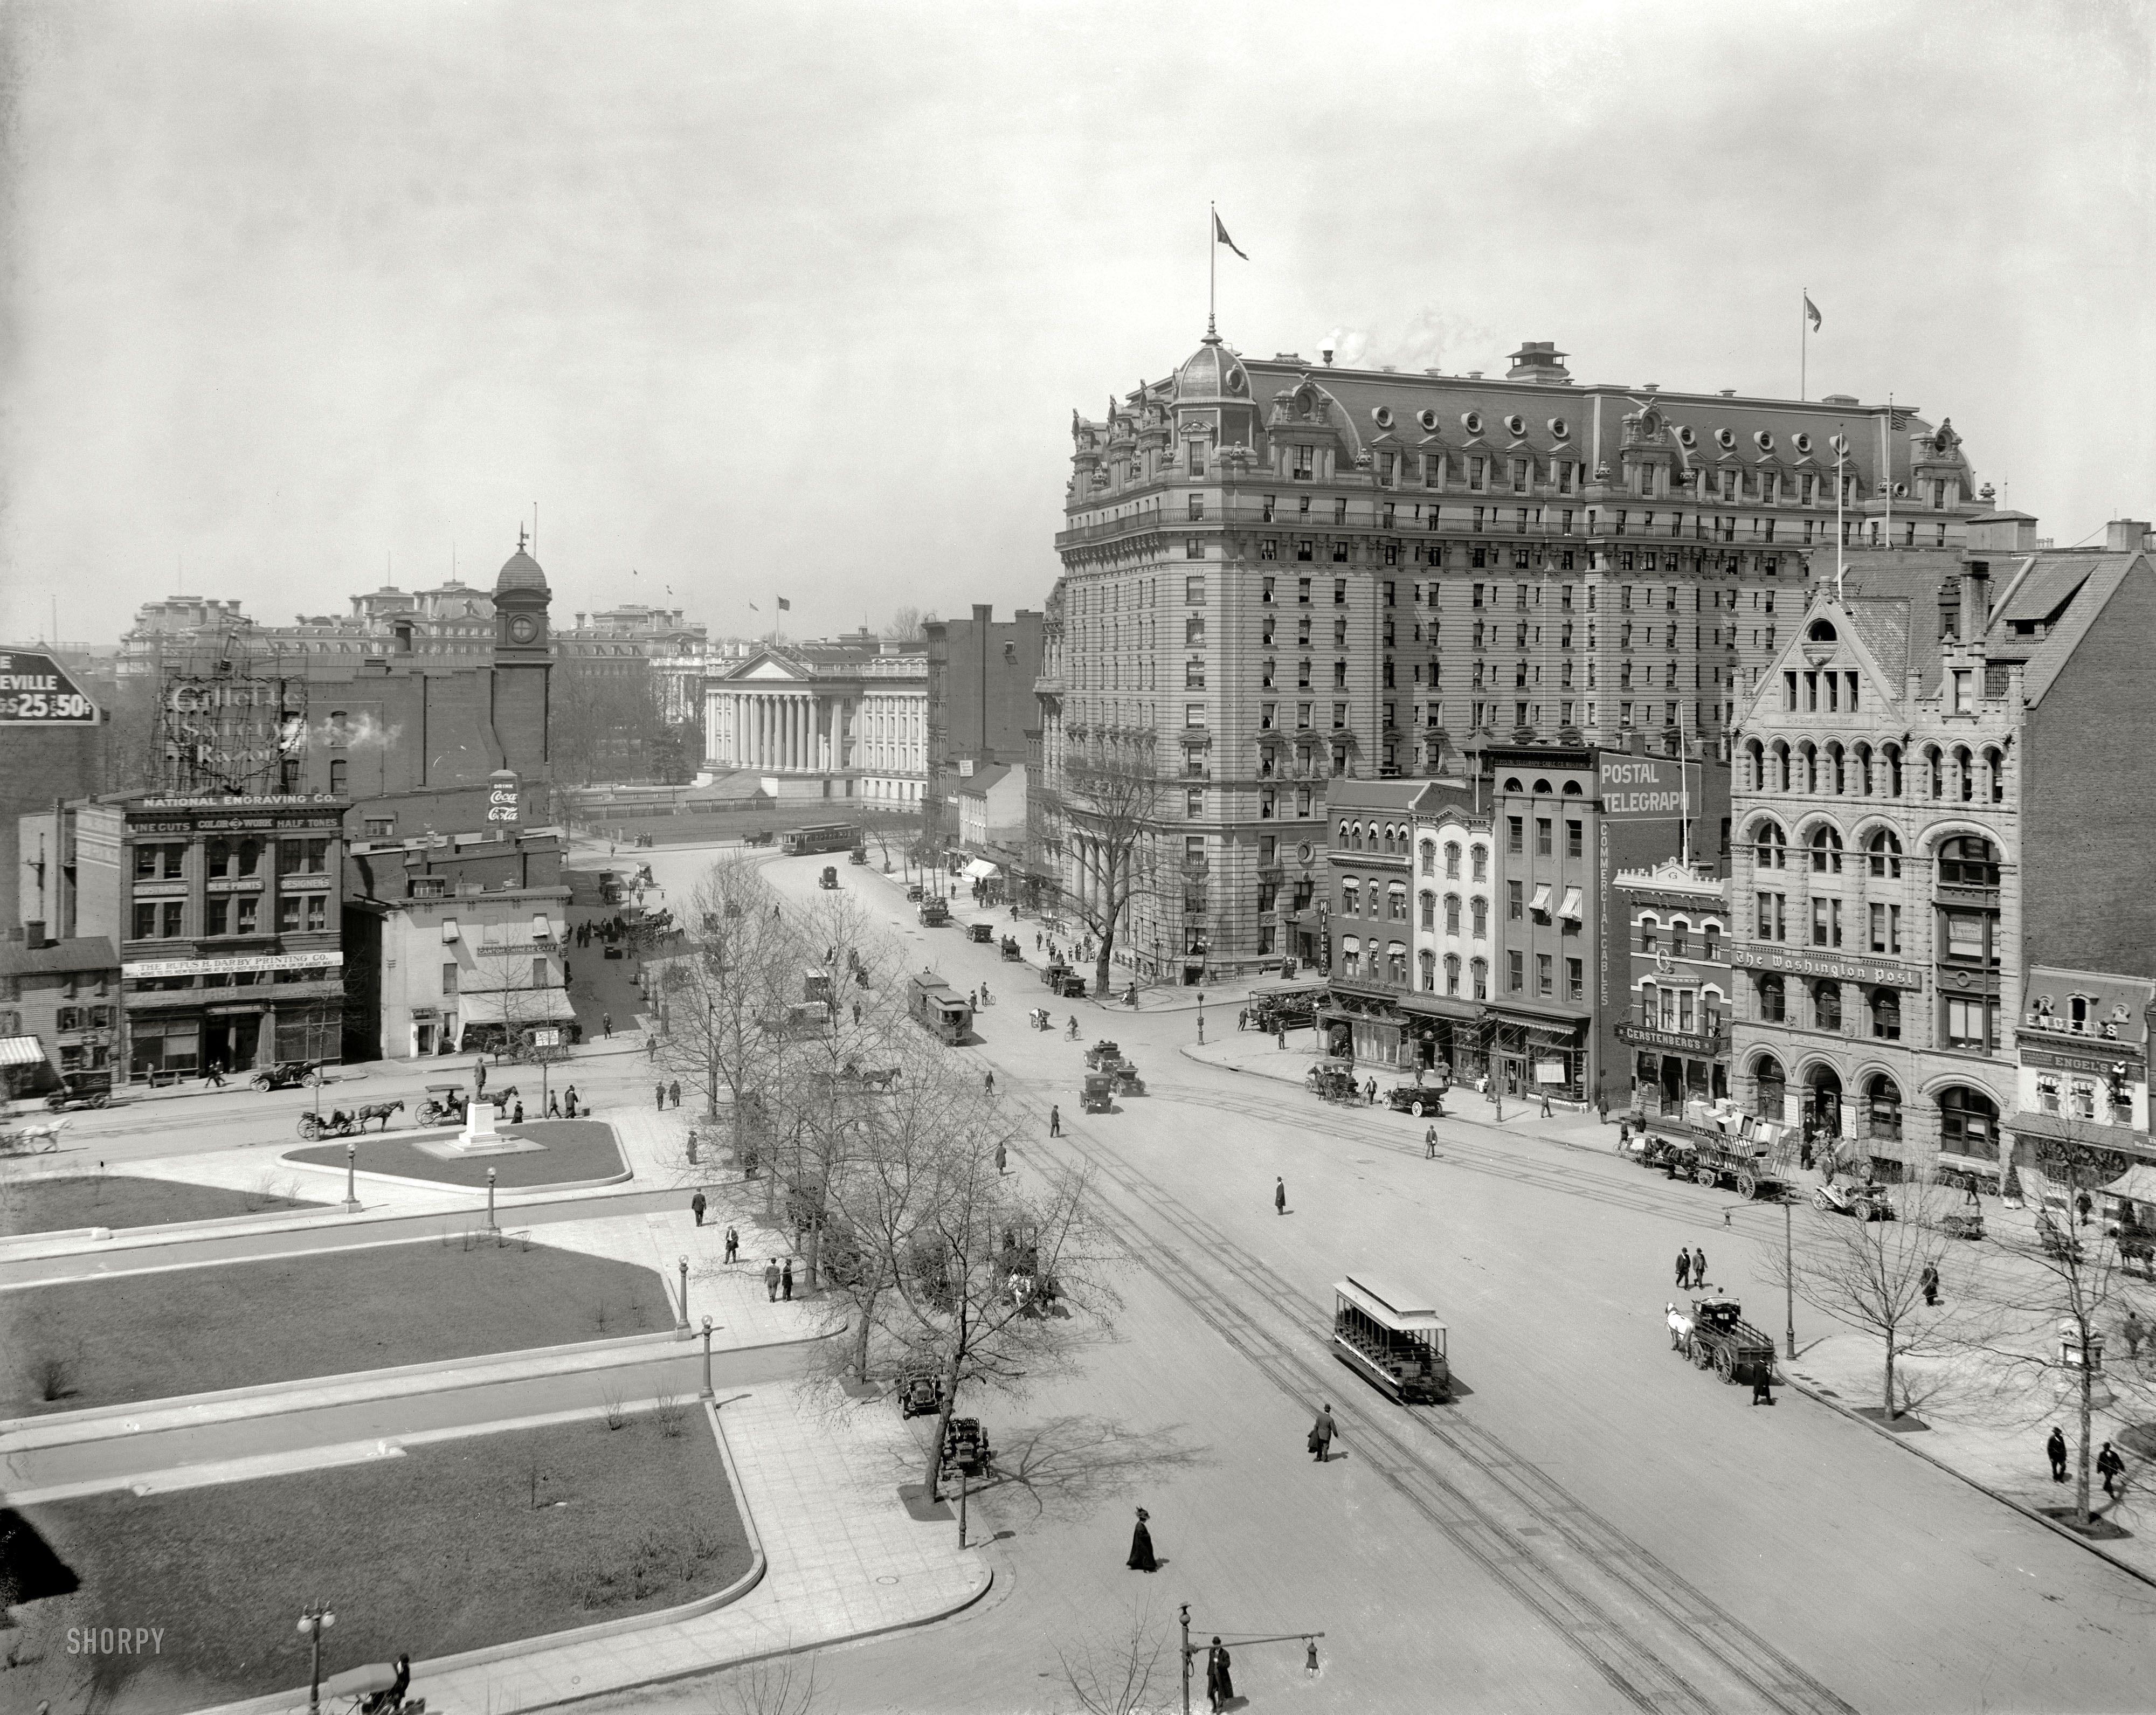 Washington, D.C., circa 1910. "Pennsylvania Avenue west from the Old Post Office." Landmarks here include the Washington Post newspaper, the Willard Hotel between 14th and 15th, the U.S Treasury, a bit of the White House, and the State, War and Navy building. Detroit Publishing glass negative. View full size.